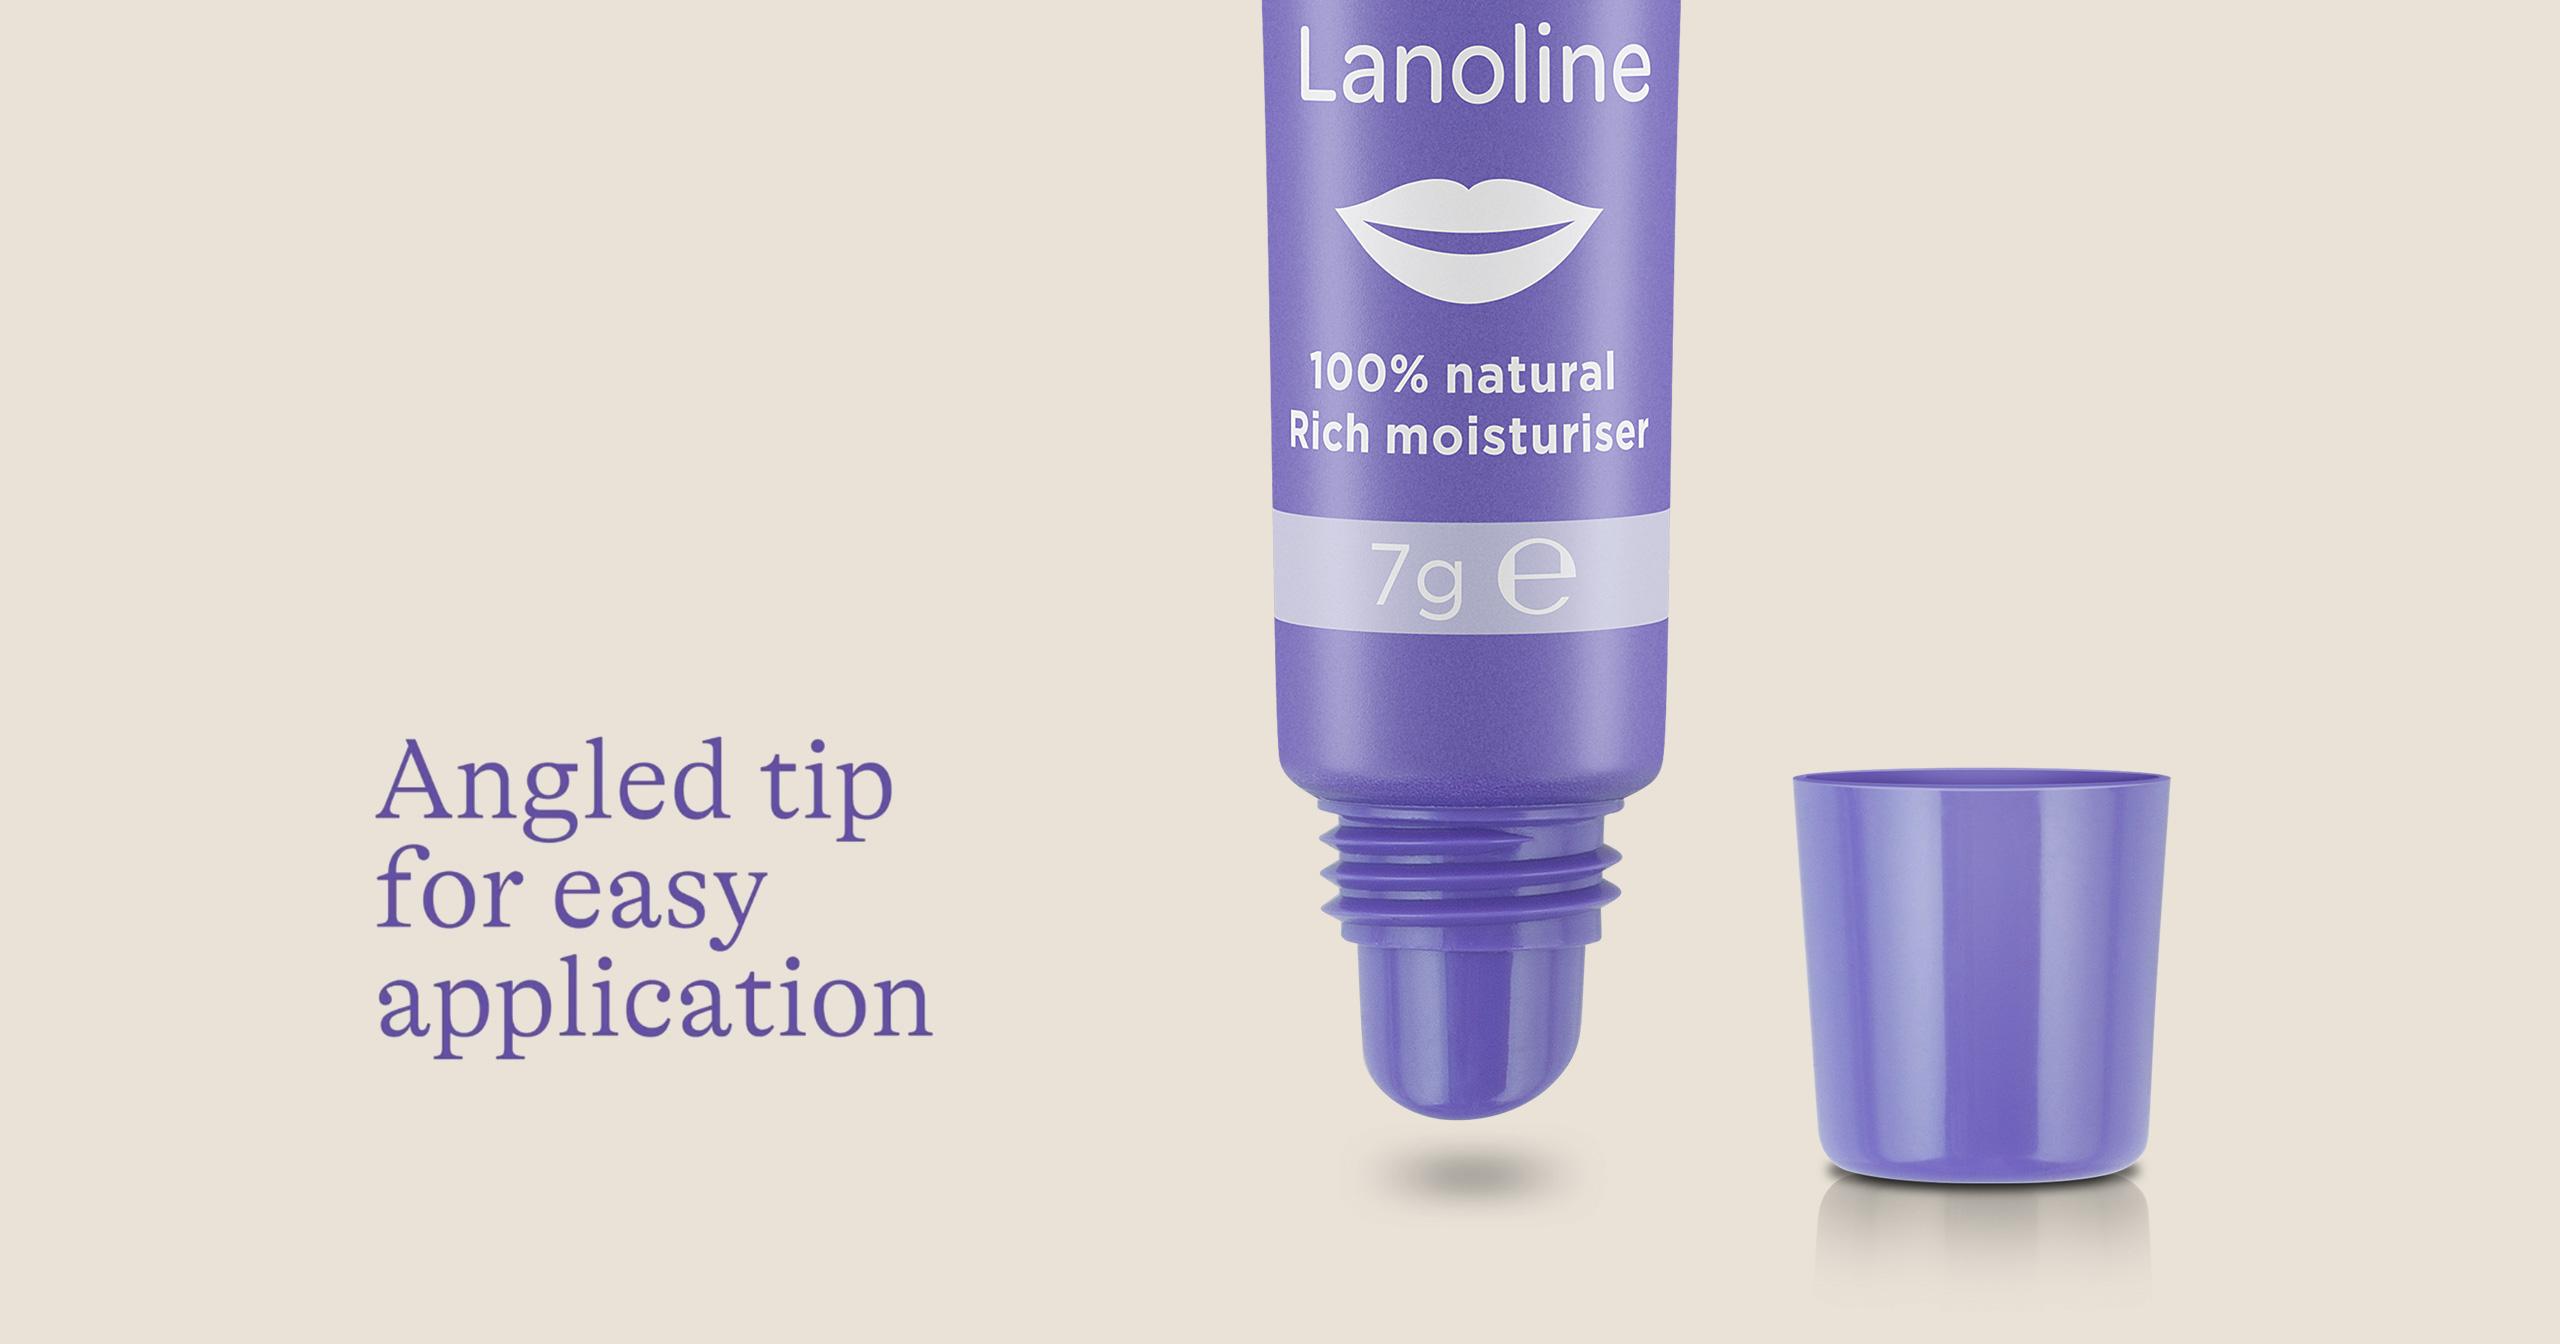 3D visualisation of health and beauty product. Lanoline lip balm, detail view